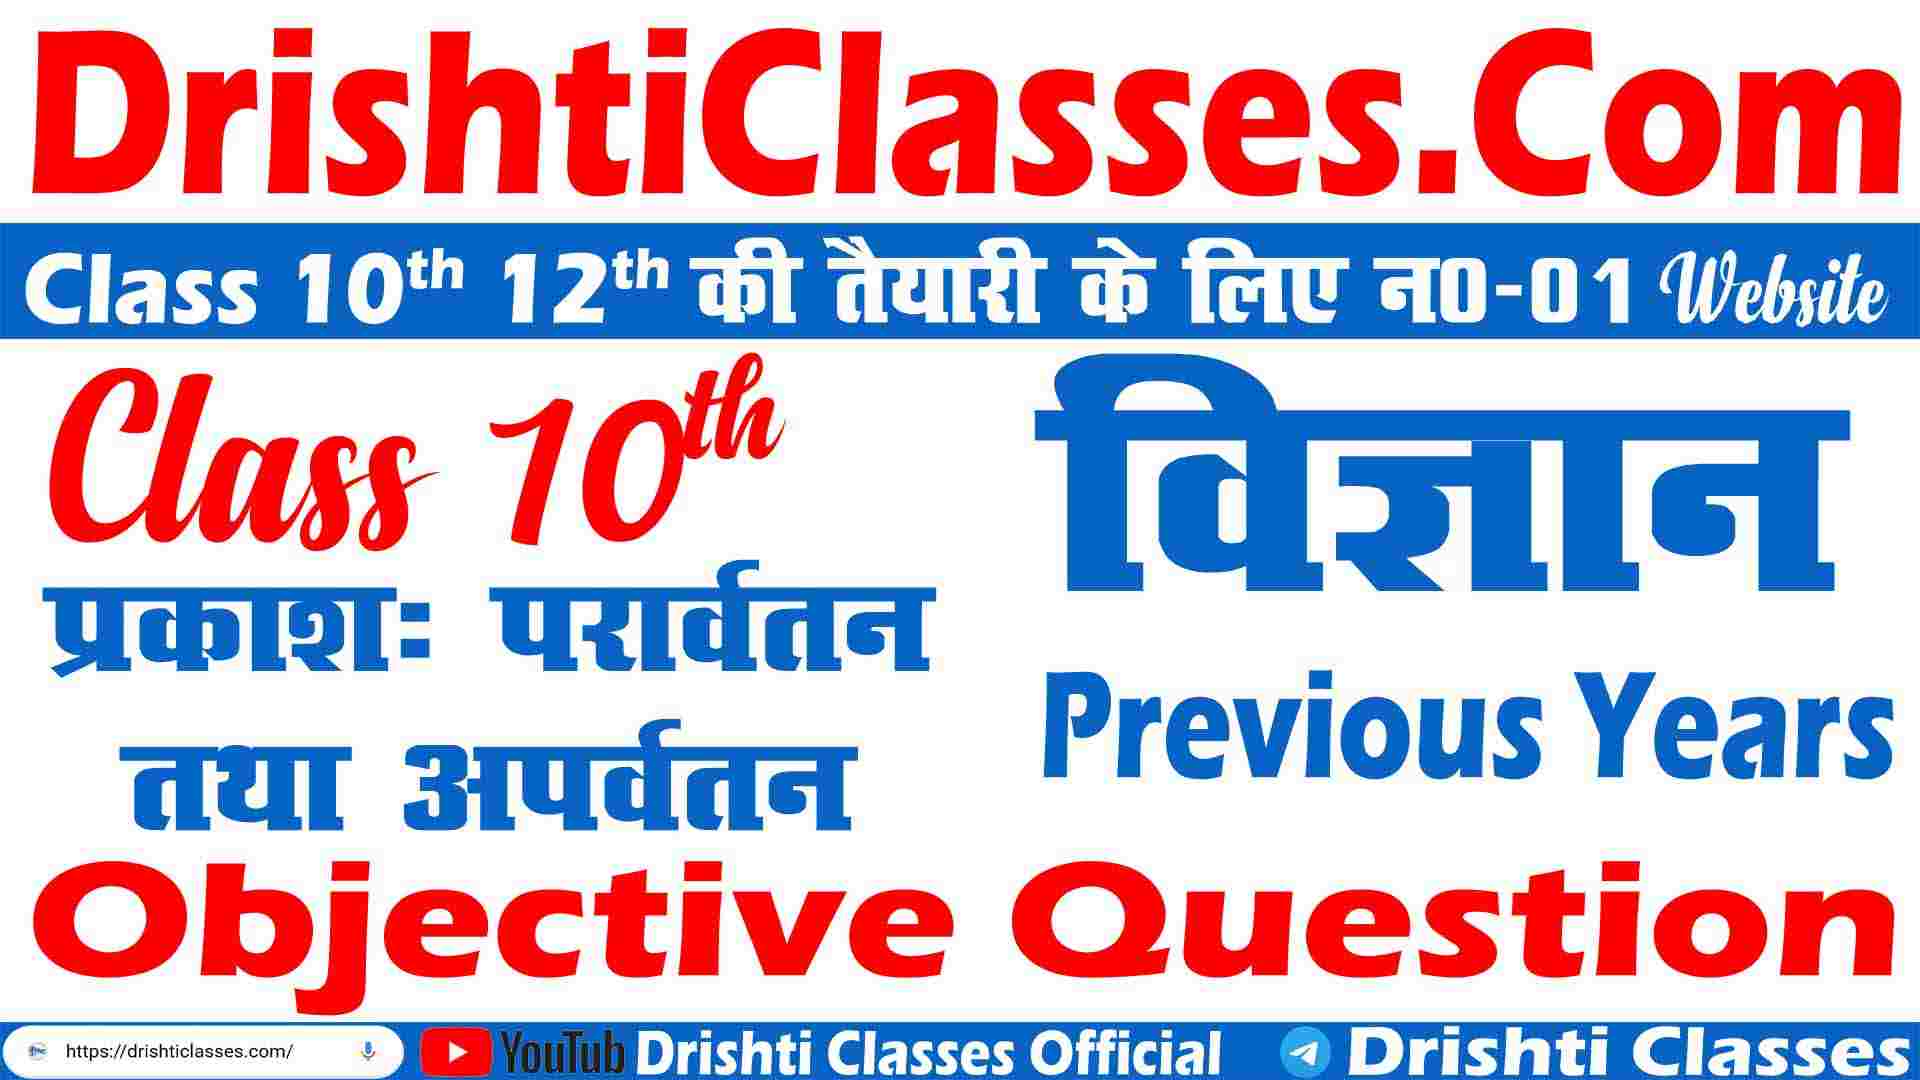 Physics Objective Previous Question, Class 10th Physics Objective Previous Question, 10th Important Objective Question, Objective Previous Question, Class 10th physics Objective Previous Question in Hindi, Physics Objective Previous Question 2023,Class 10th Physics Objective Previous Question 2023, Class 10th Physics Objective Question 2023, प्रकाश का परवर्तन तथा अपवर्तन Objective Question 2023, Class 10th प्रकाश का परवर्तन तथा अपवर्तन VVI Objective Question 2023, Class 10th Physics VVI Objective Question 2023,